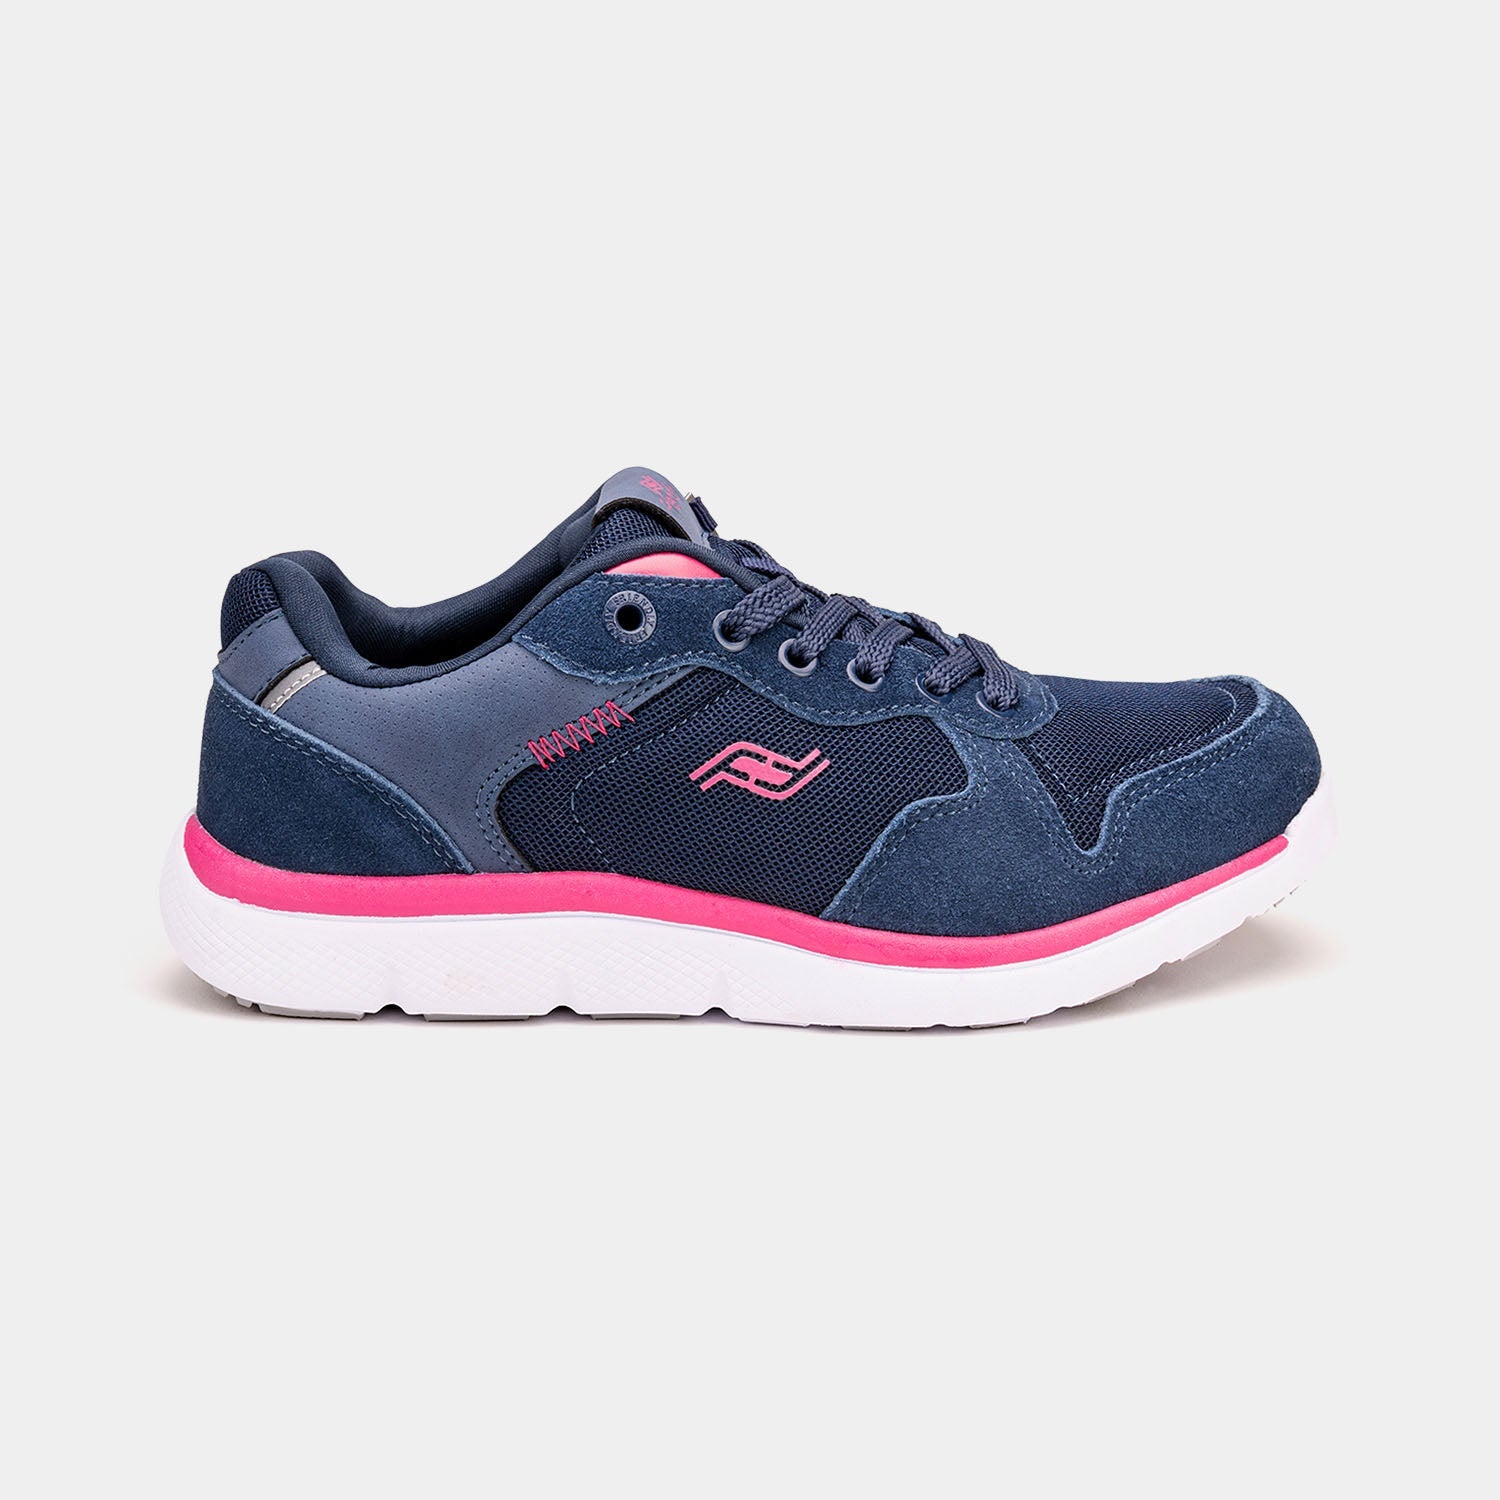 Navy blue women's shoe with white bottom, hot pink accents, and rear zipper access.